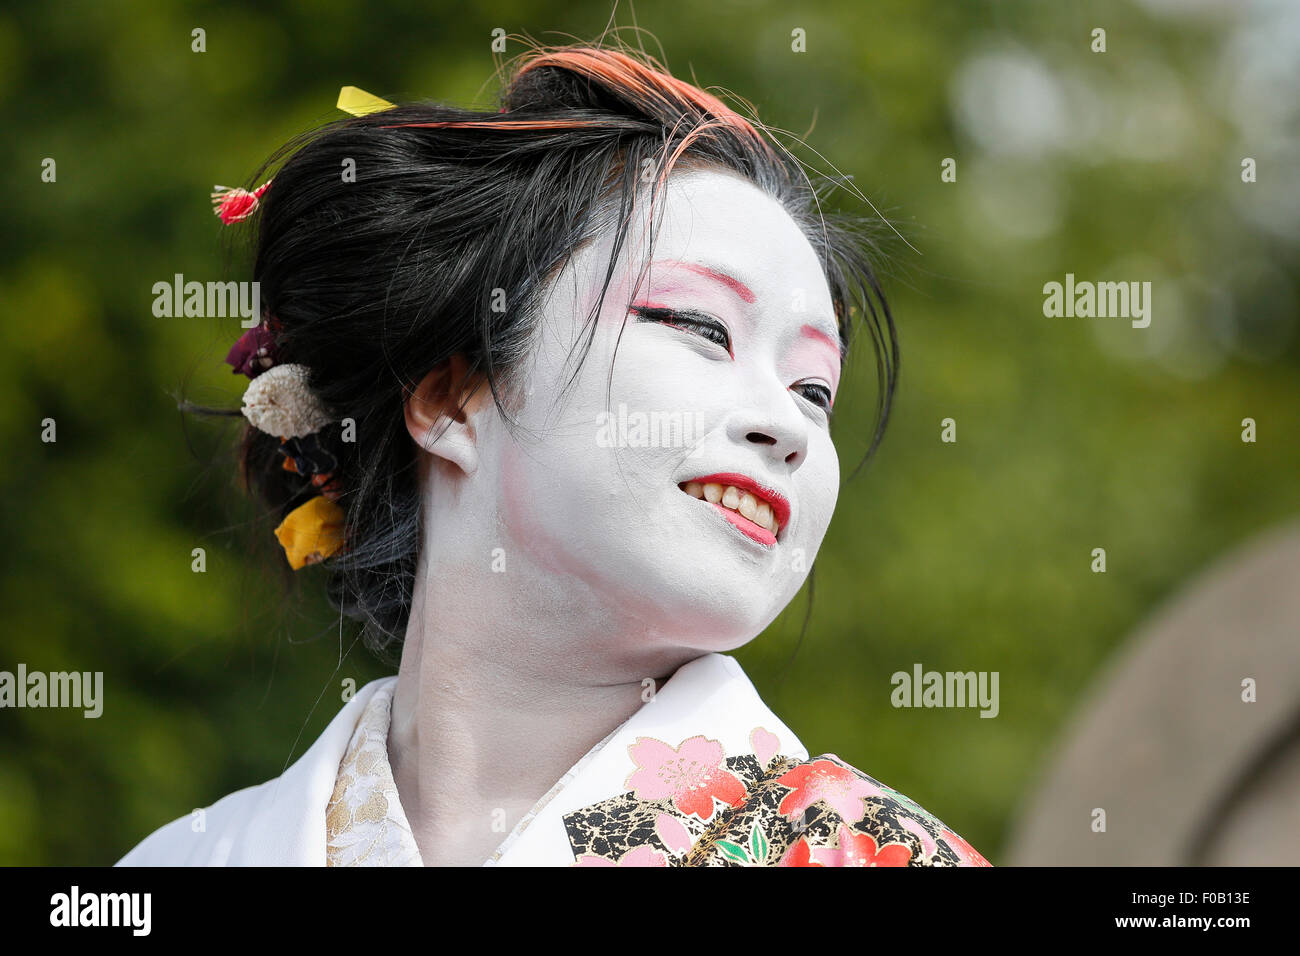 Dancer at the Edinburgh Fringe festival in traditional Japanese costume while performing outdoors at The mound, Edinburgh, Stock Photo